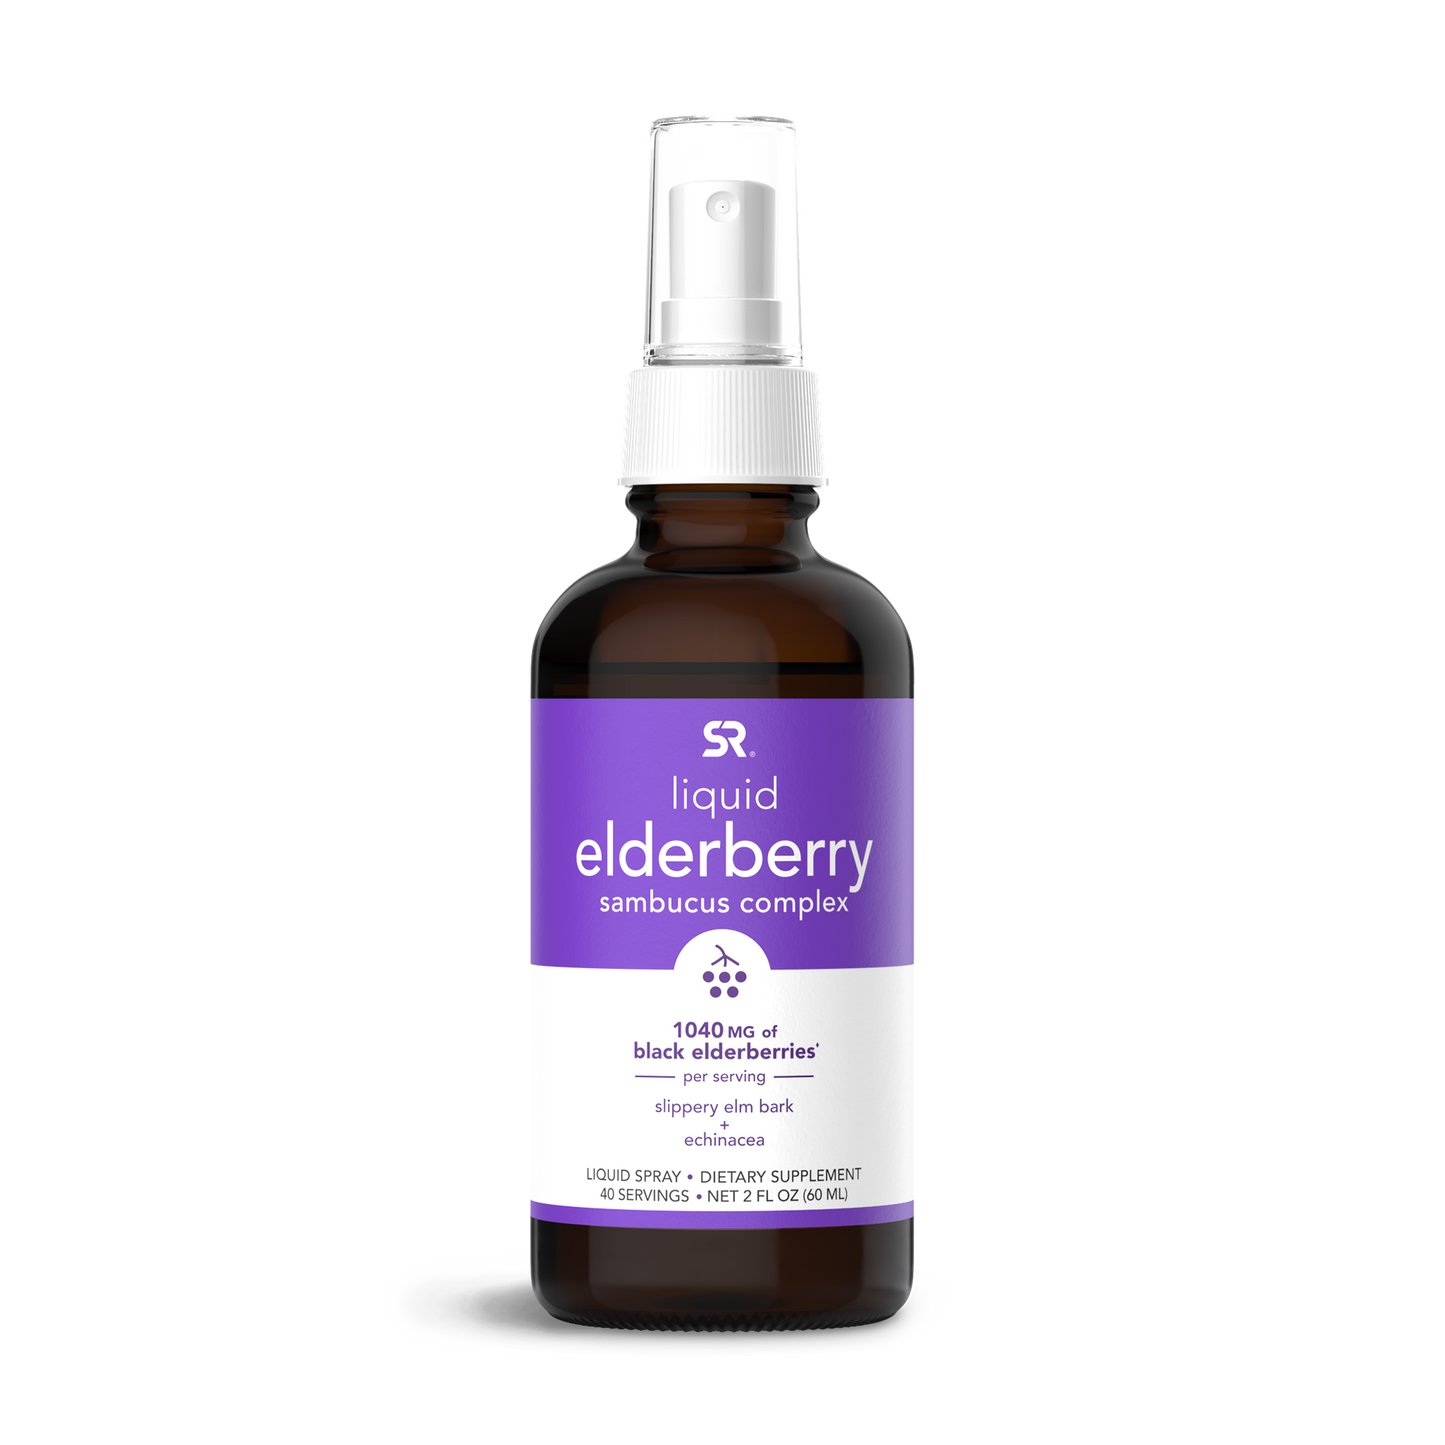 a bottle of Elderberry Liquid Spray with a purple label by Sports Research.